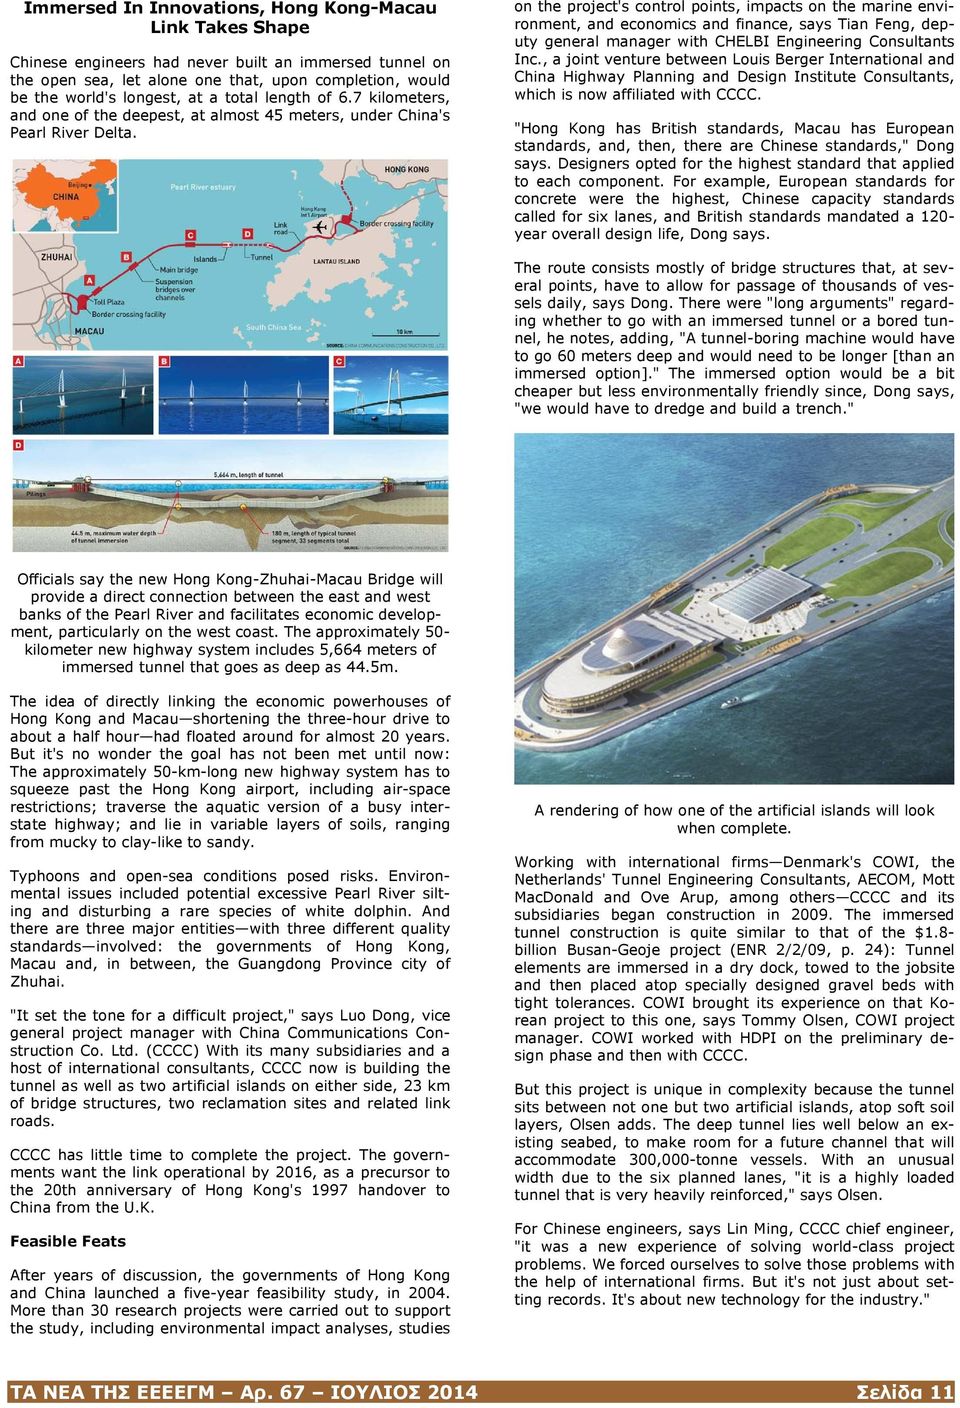 on the project's control points, impacts on the marine environment, and economics and finance, says Tian Feng, deputy general manager with CHELBI Engineering Consultants Inc.